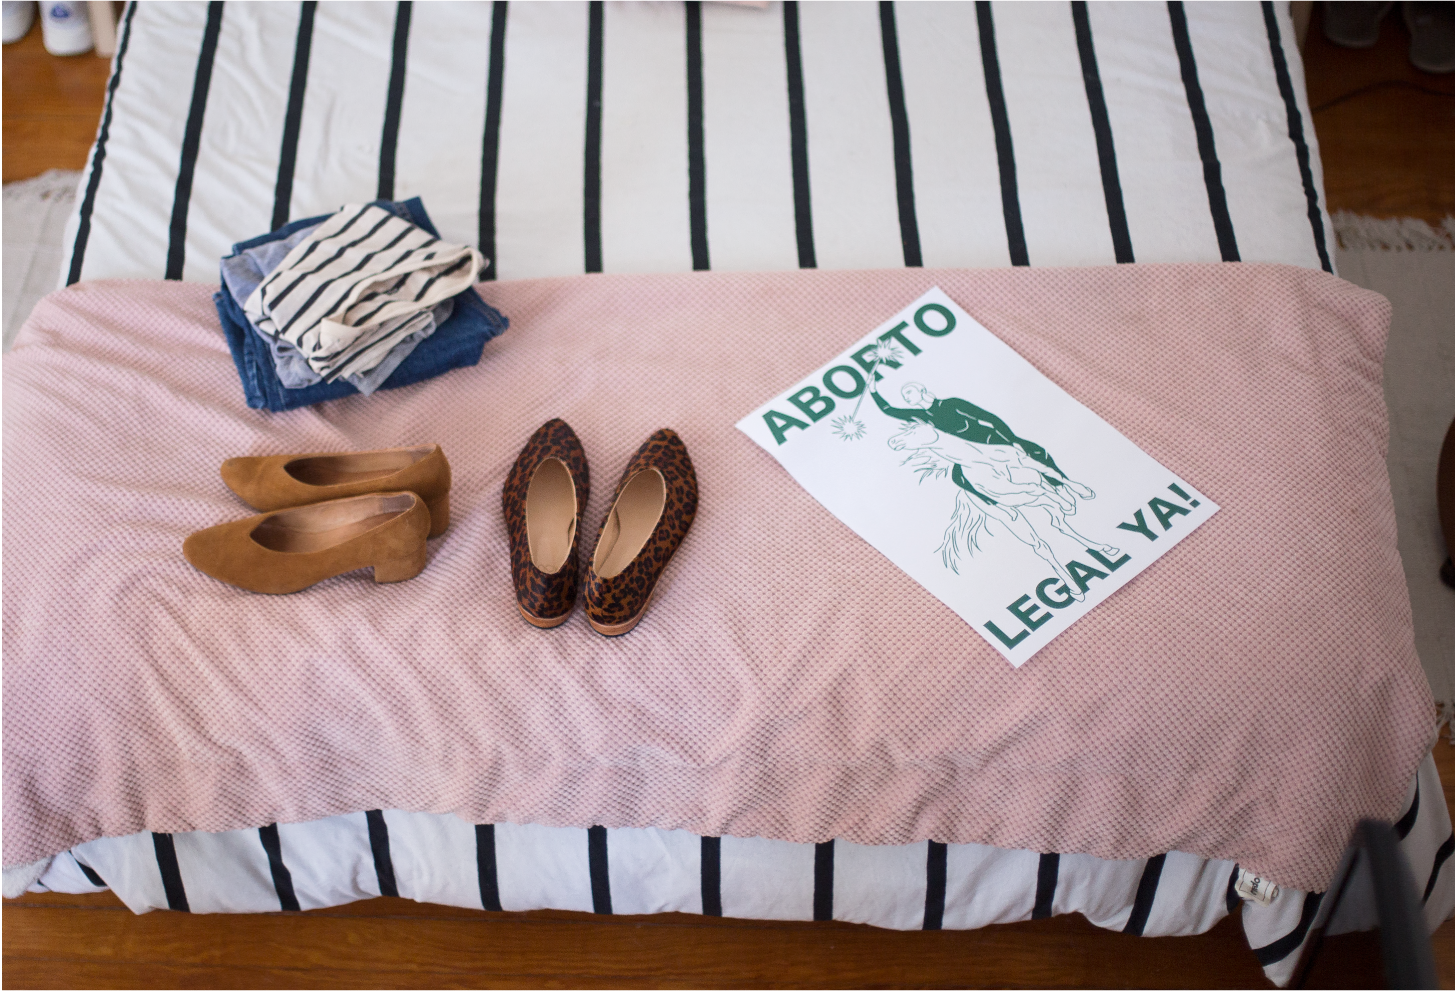 Above, a folded pile of Daiana’s comfortable but stylish uniform of denim and tees; the ZX Belu Pump in a past season color and the Glove Flat in Leopard Pony; A poster Daiana designed + illustrated in the color green for Argentina’s ‘Legal Abortion…